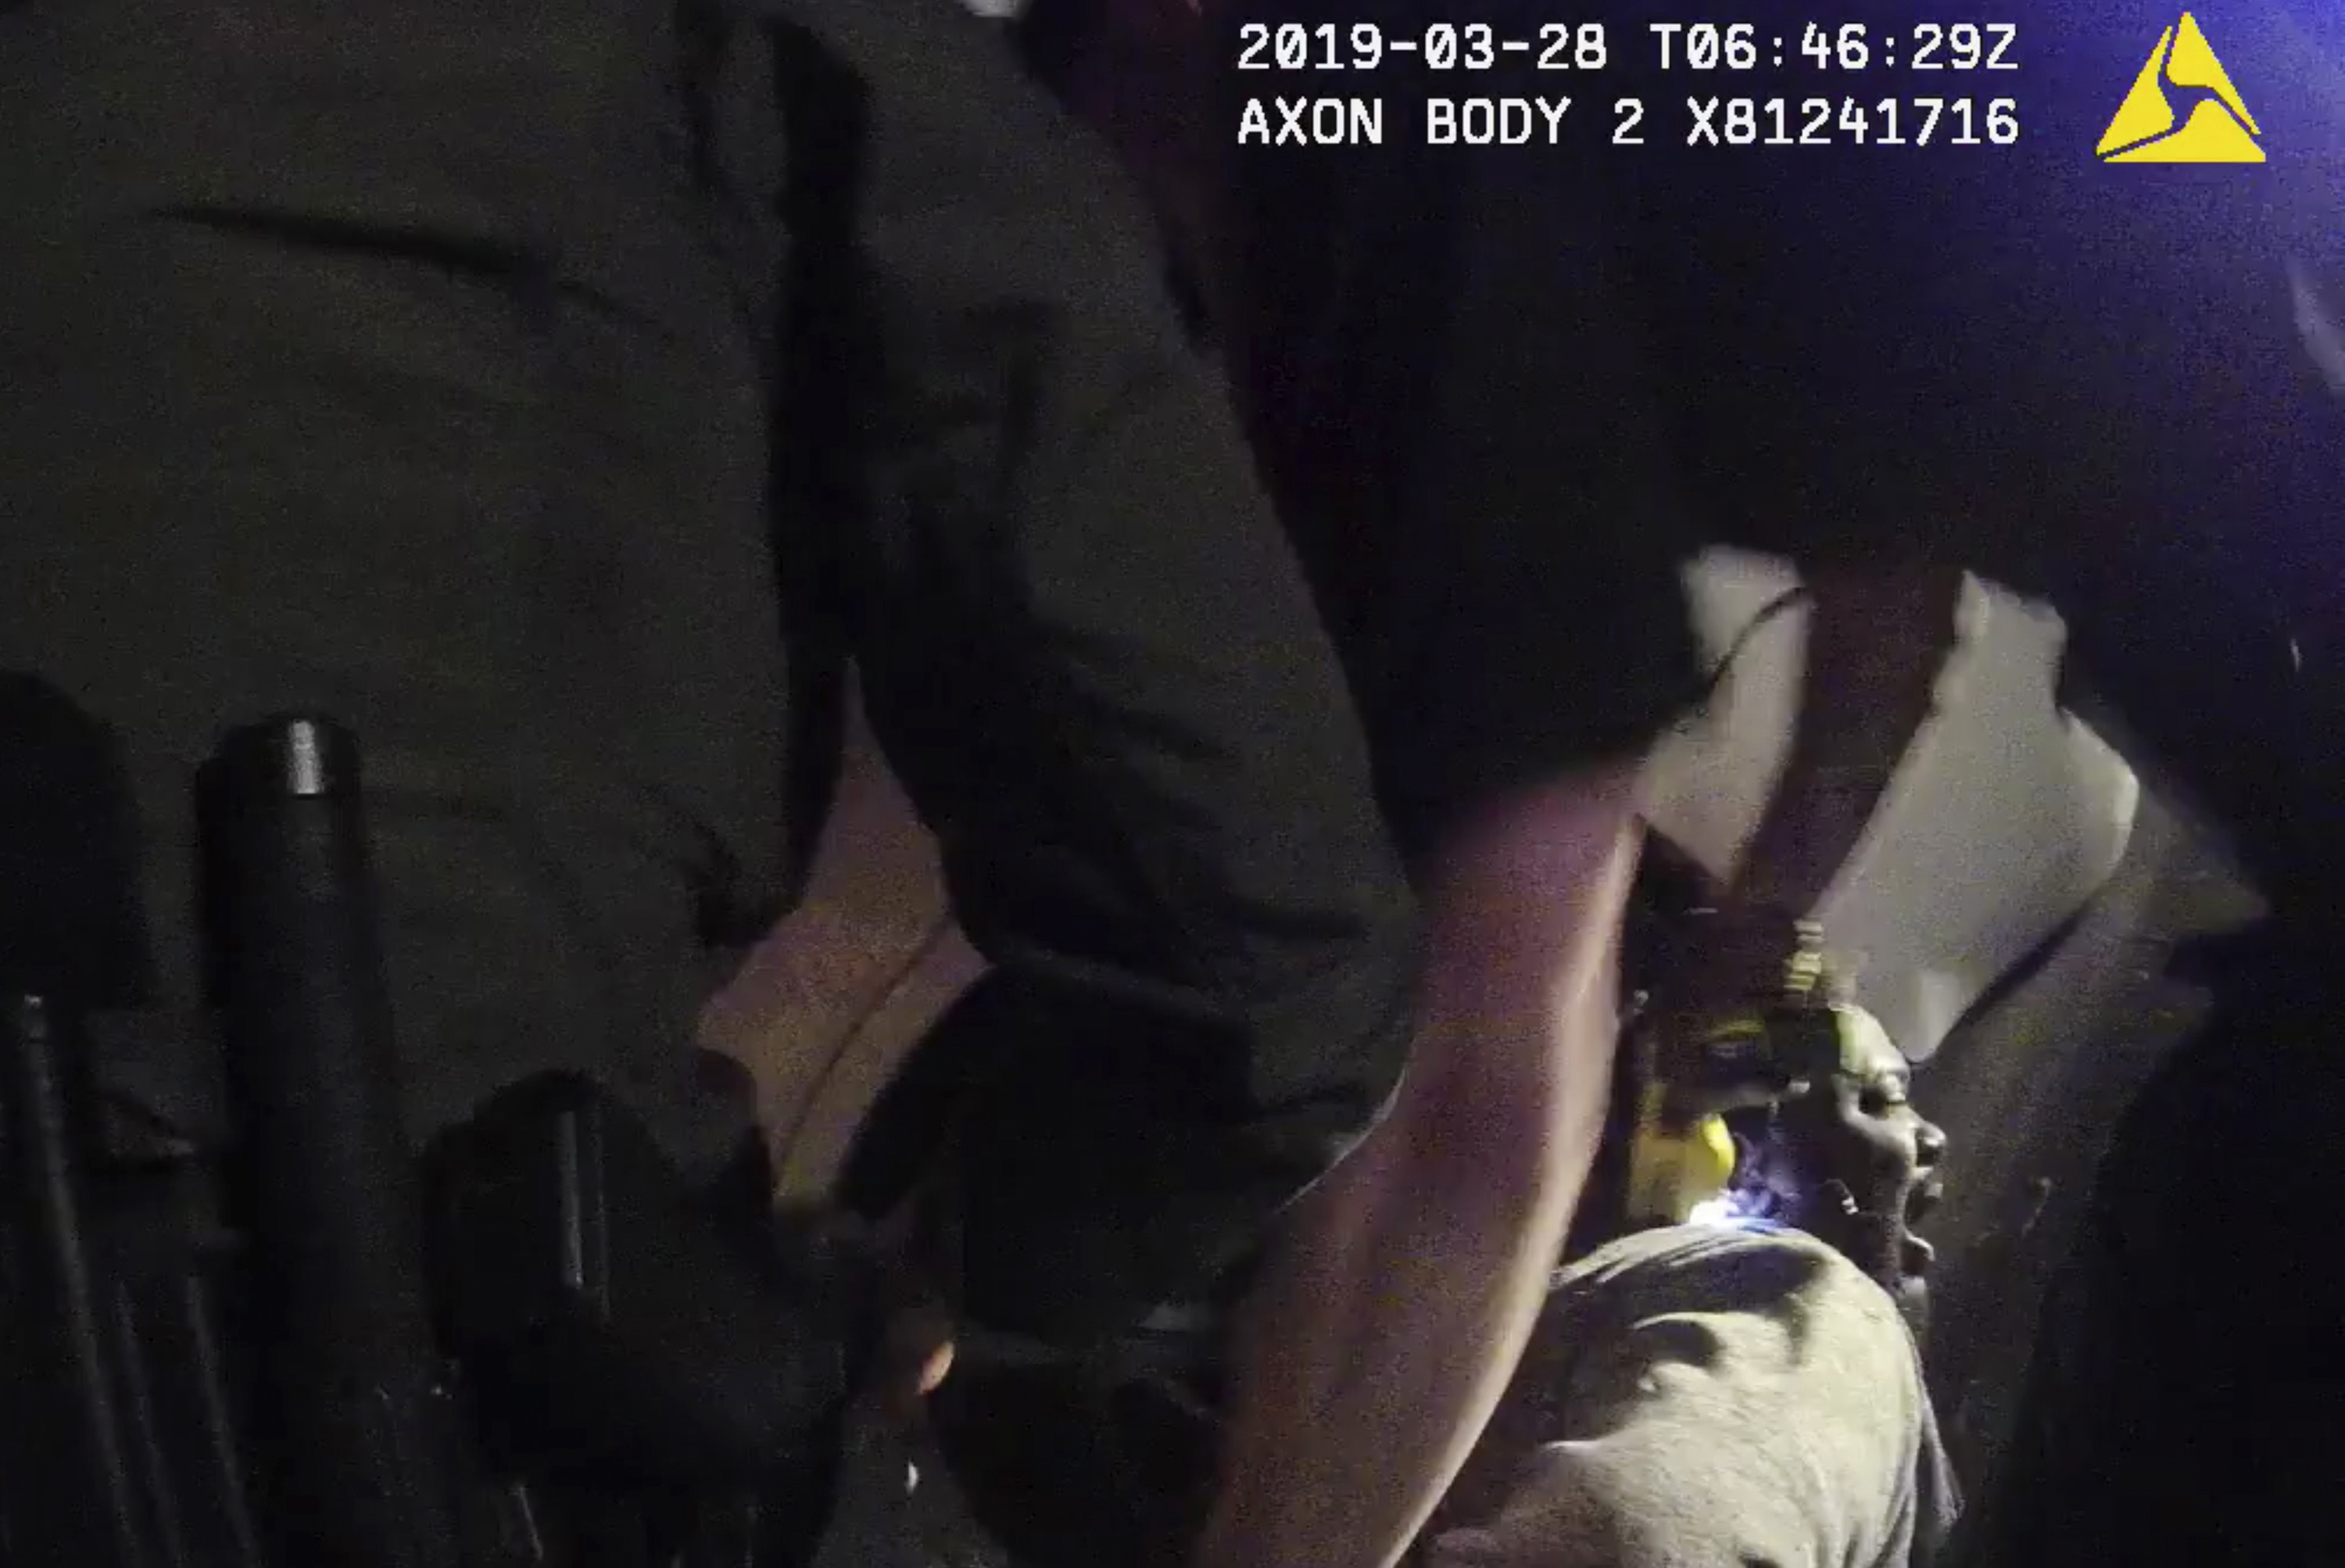 In this image from a March 28, 2019, body-worn camera video provided by the Austin Police Department in Texas, Williamson County deputies hold down Javier Ambler as one of them uses a Taser on Ambler's back during his arrest. 